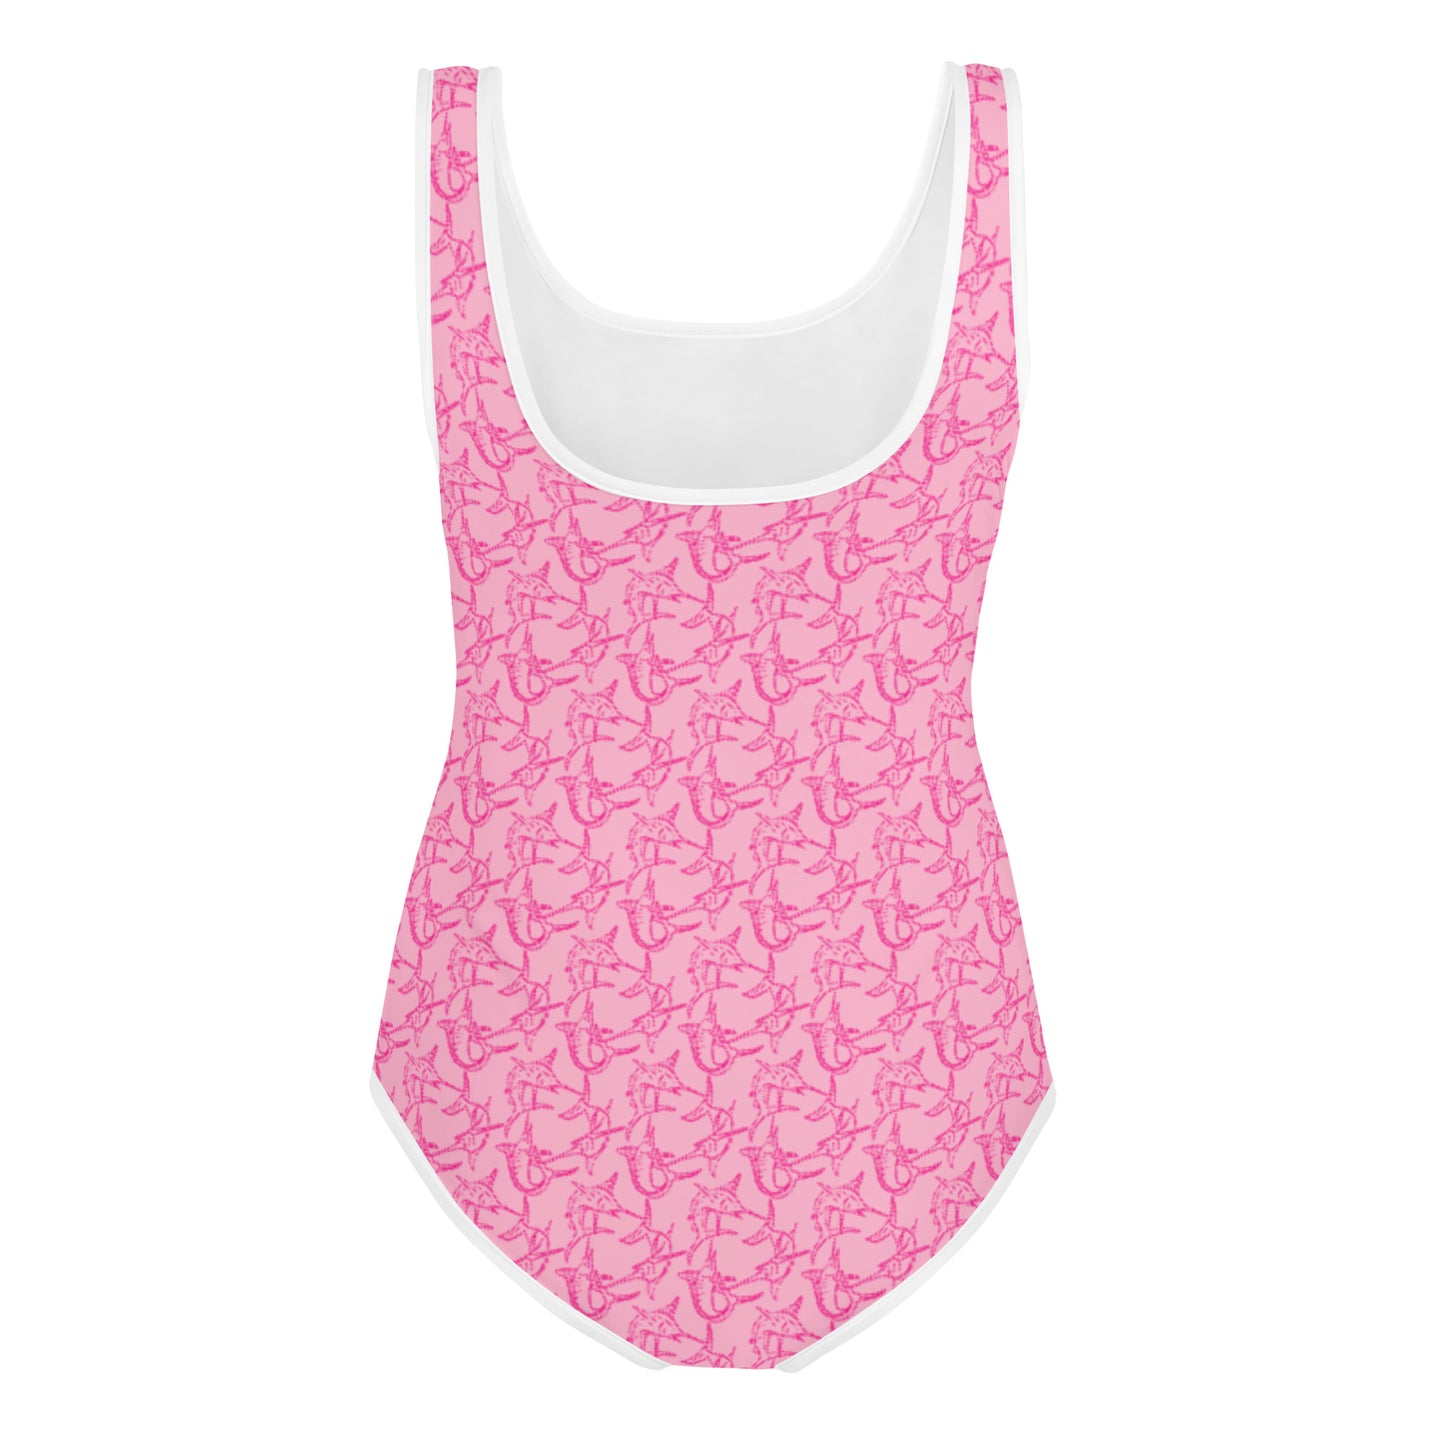 Grand slam All-Over Print Youth Swimsuit